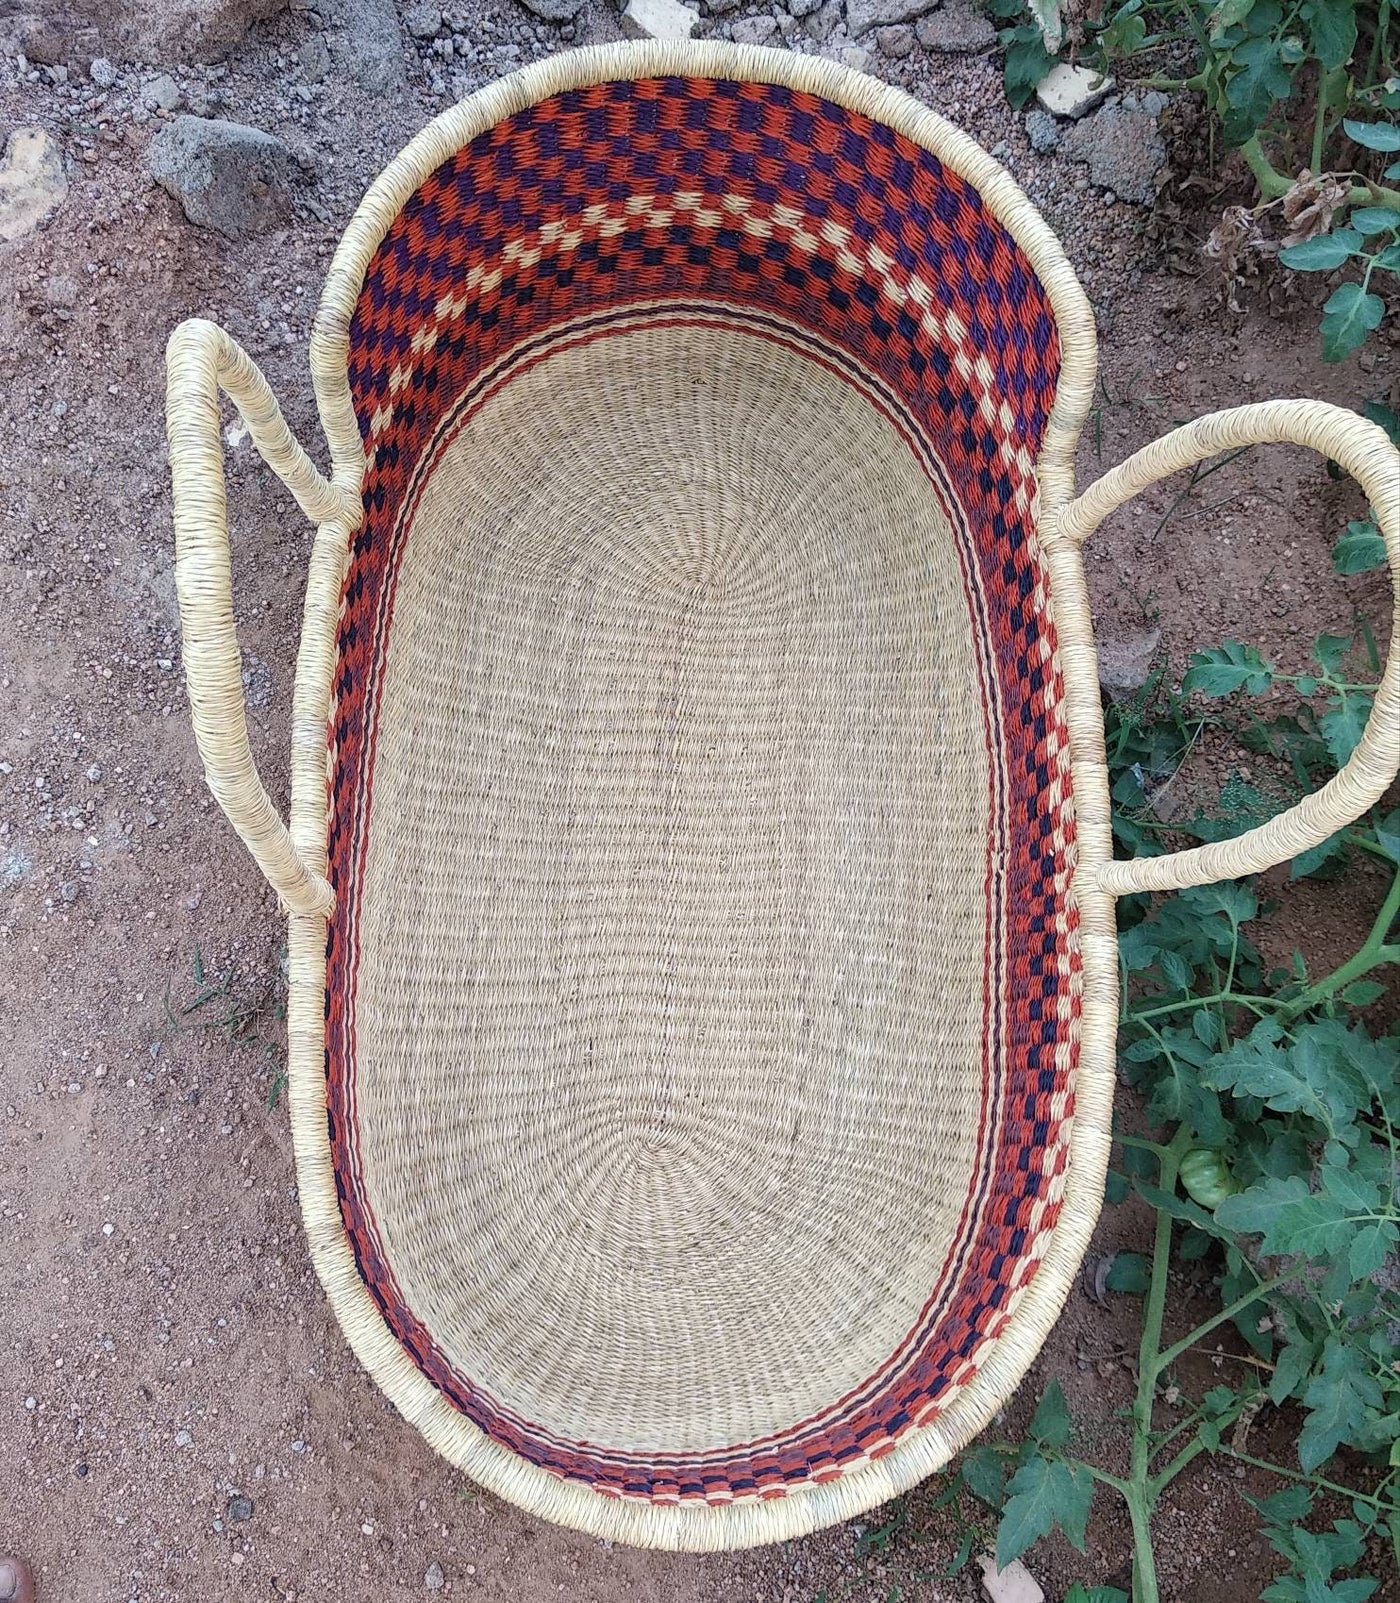 Baby Moses Basket | Baby bassinet| Baby shower gift | Baby bed | African Moses Basket | Nursery decor |Baby gift |Kids bed frame |Bassinet